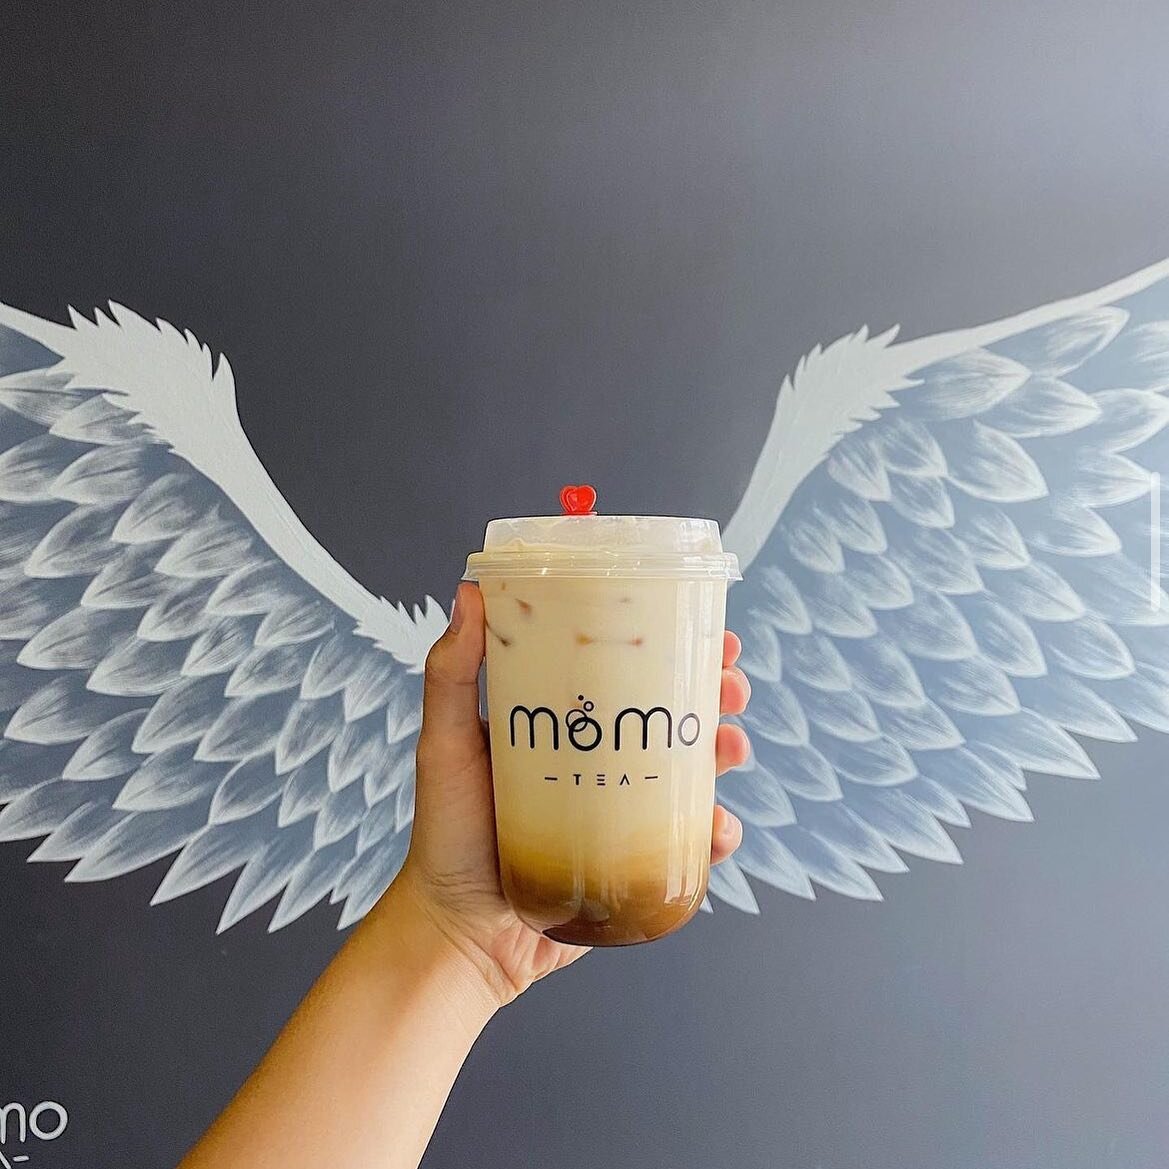 Order up 🧋Have you stopped by for a  coffee break yet? Choose from our lattes, frapp&eacute;s, milk tea coffee, and more.

📸 | @eats.with.linh 

🕑 Open 11-7PM daily; we are closed on Tuesday&rsquo;s
&bull;
&bull;
&bull;
&bull;
#momotea #momoteabr 